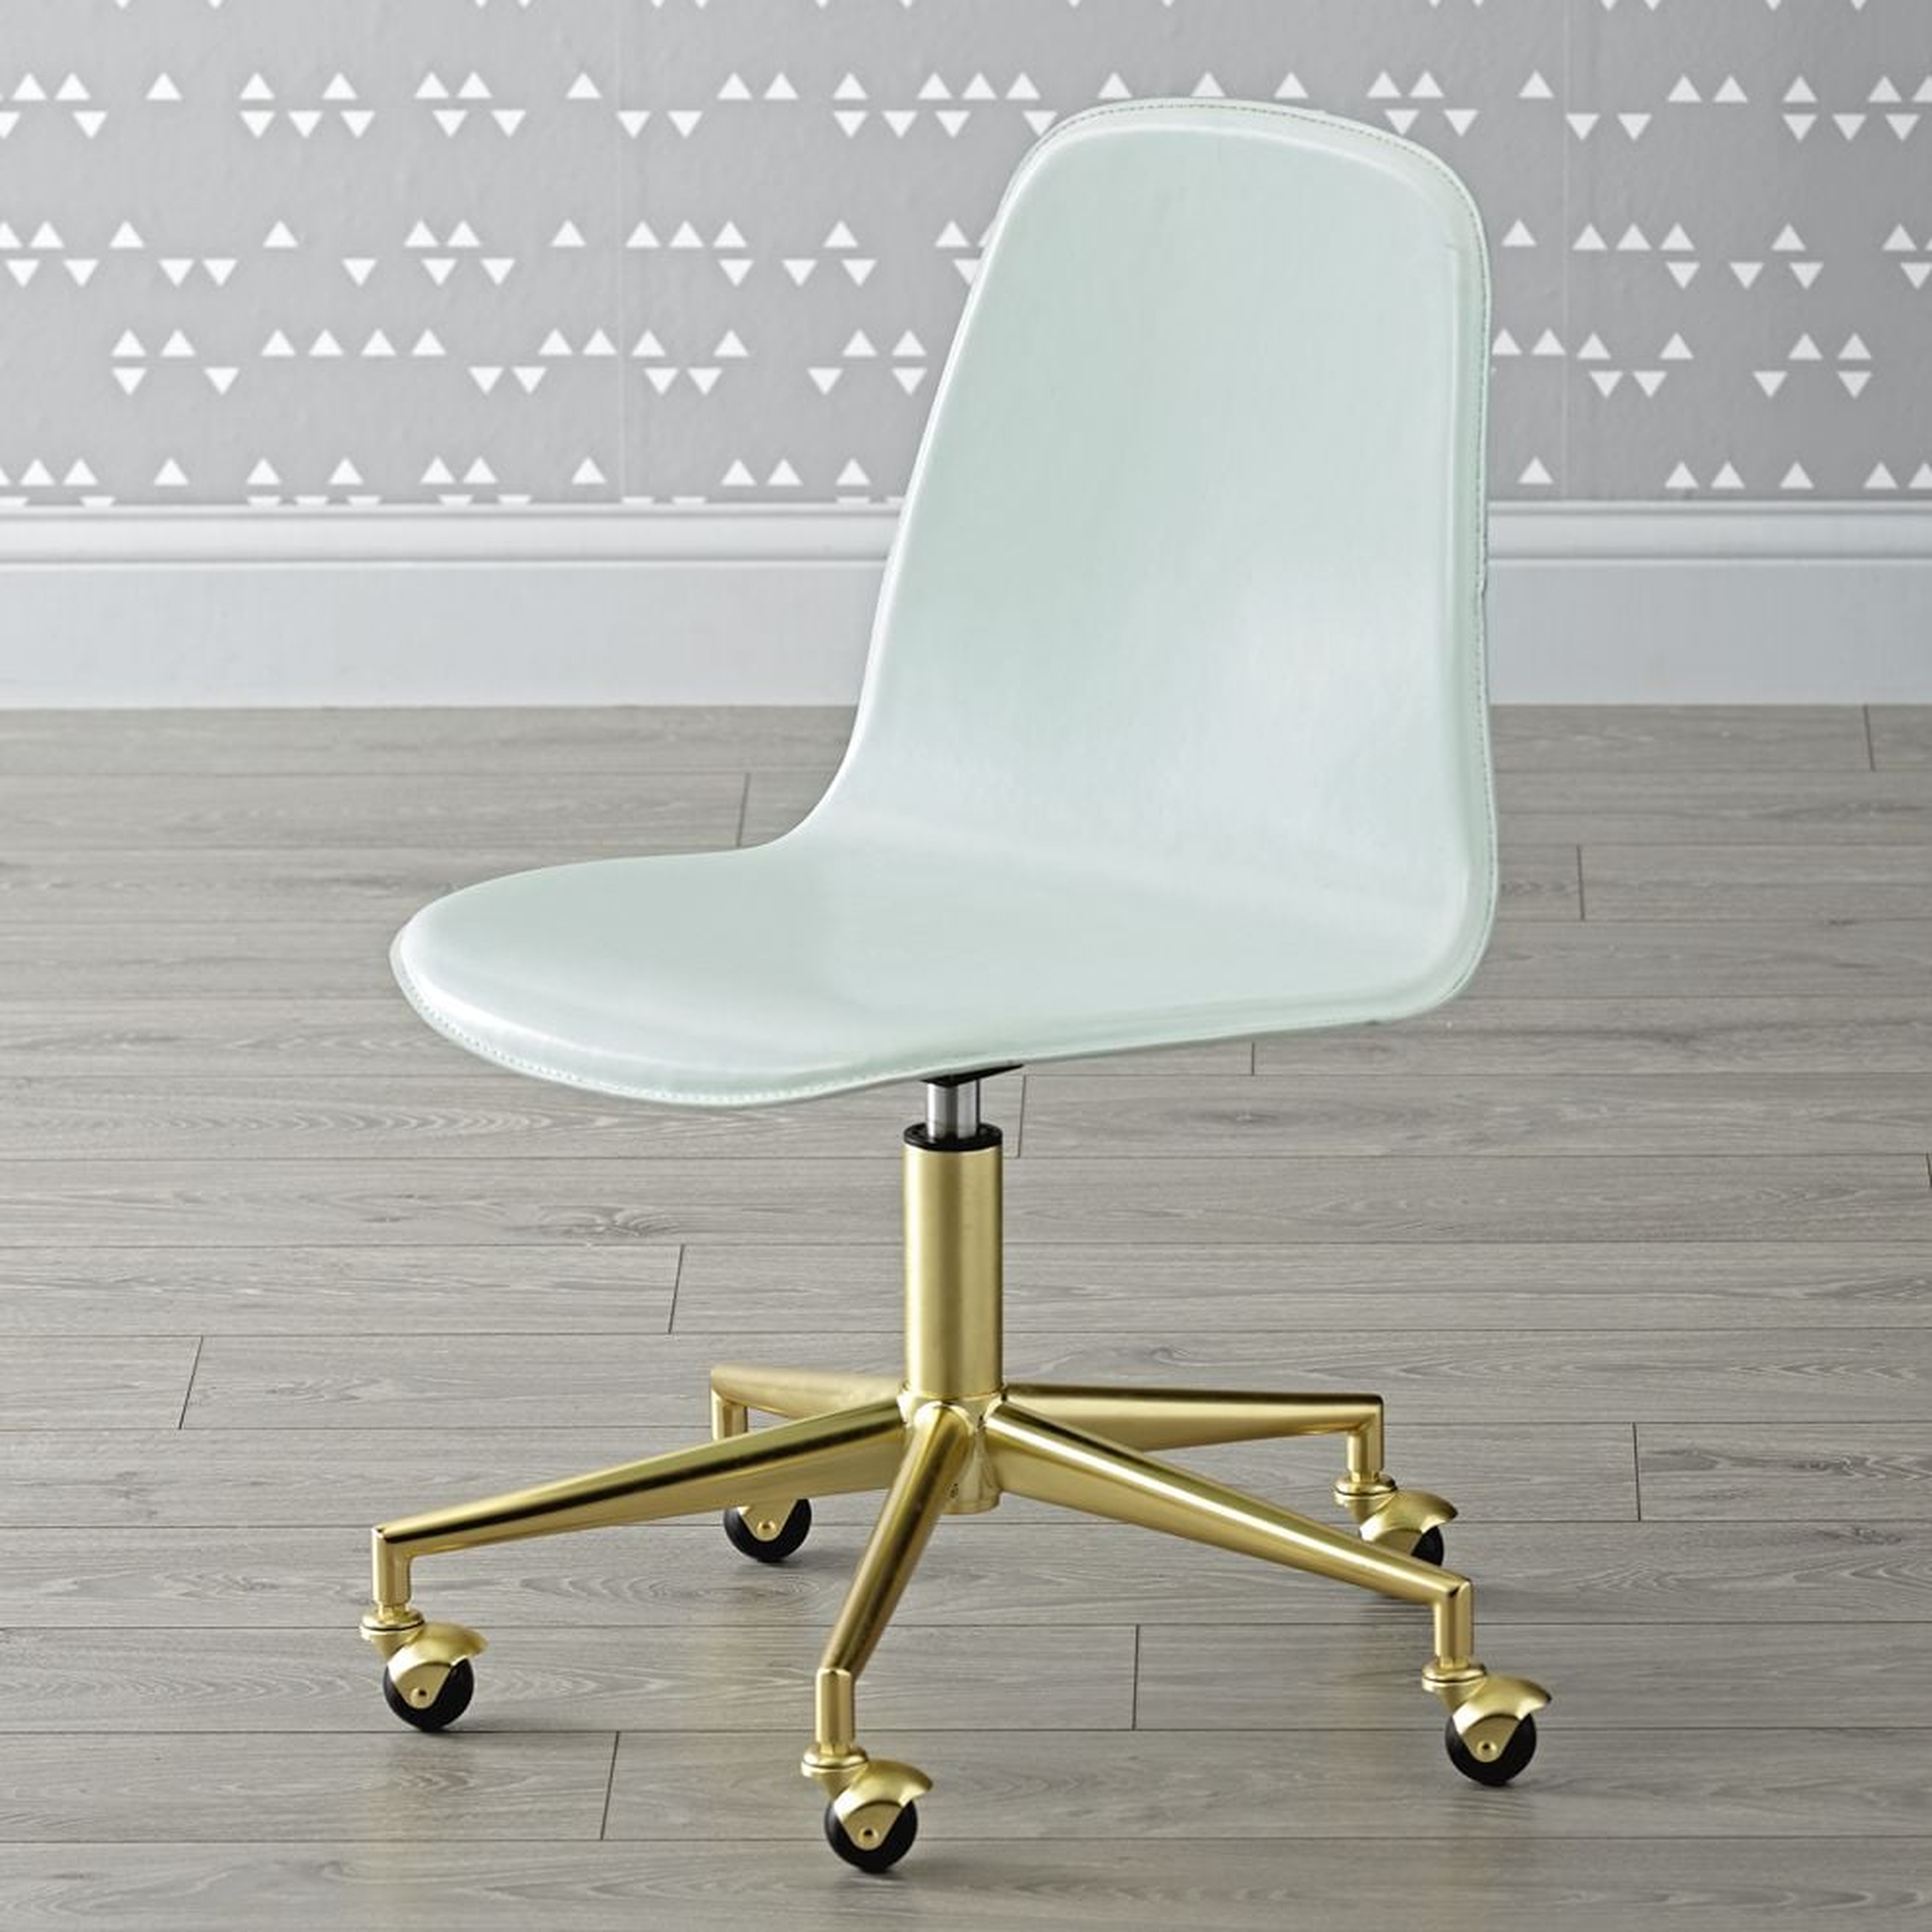 Kids Class Act Mint and Gold Desk Chair - Crate and Barrel